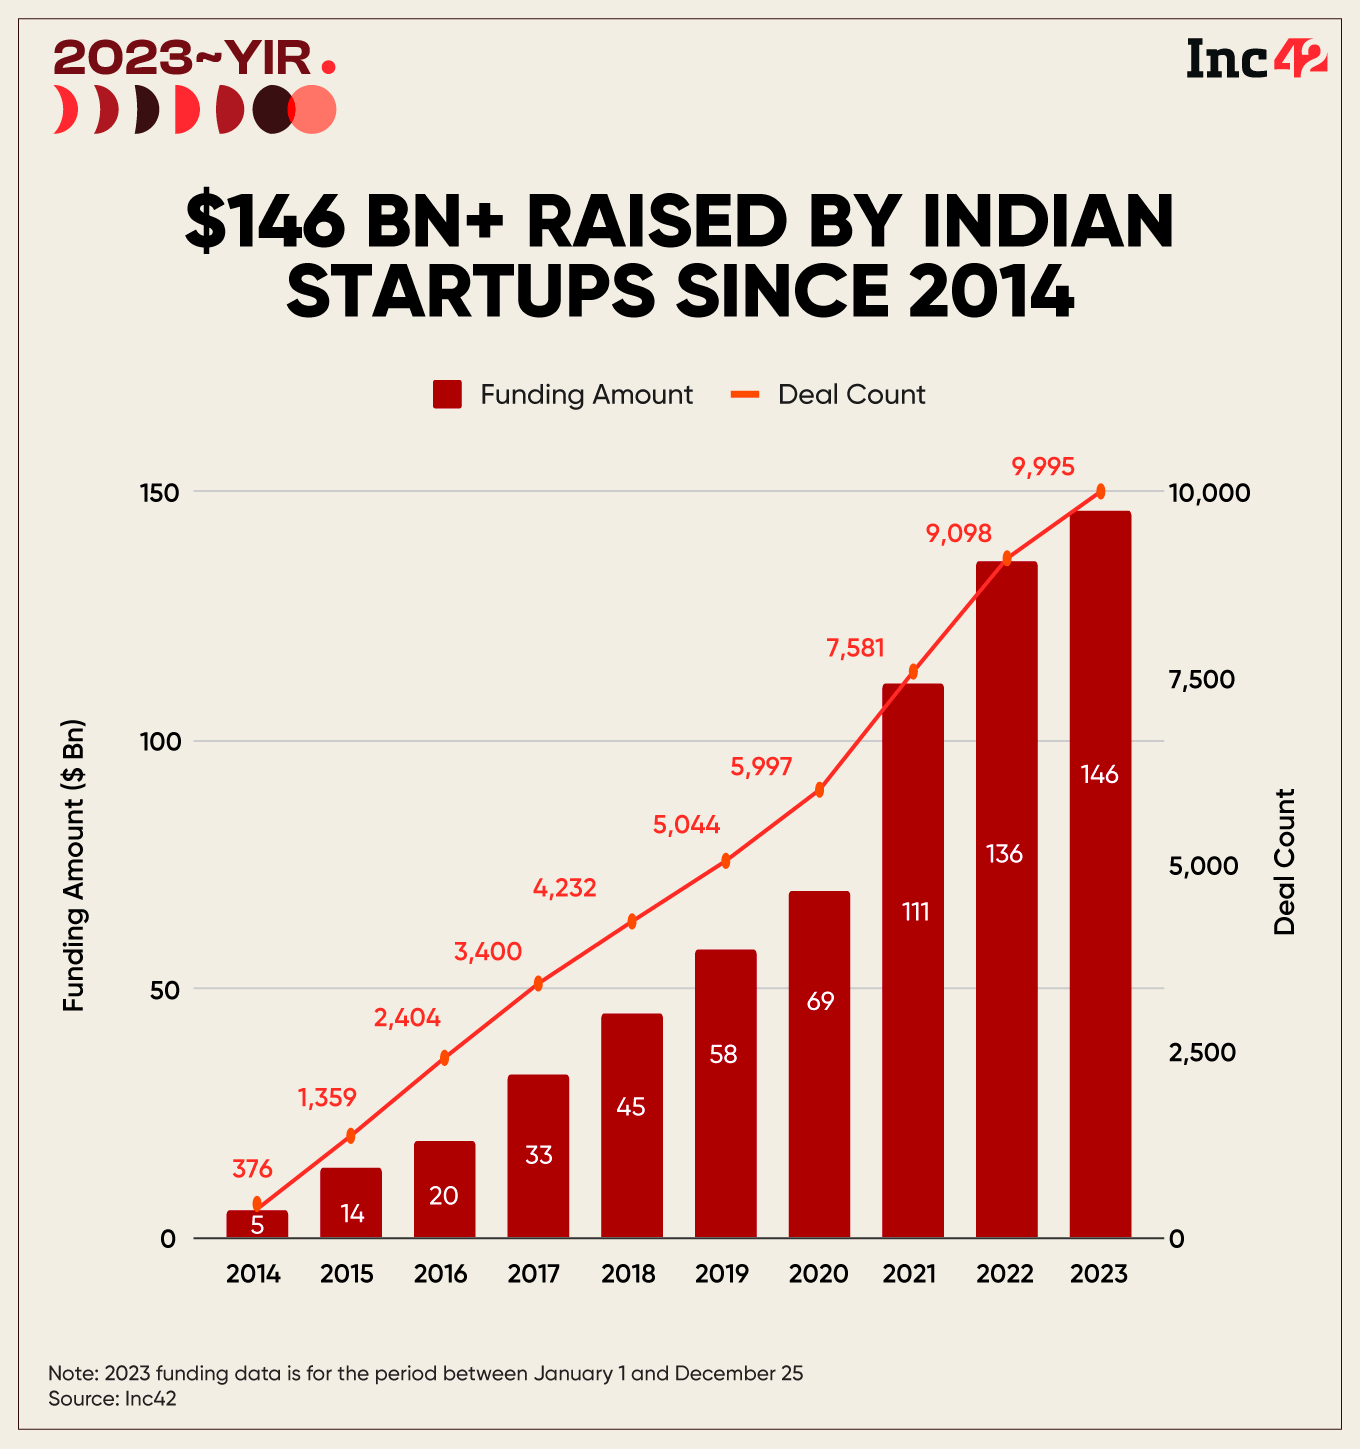 Overall startup funding between 2014 and 2023